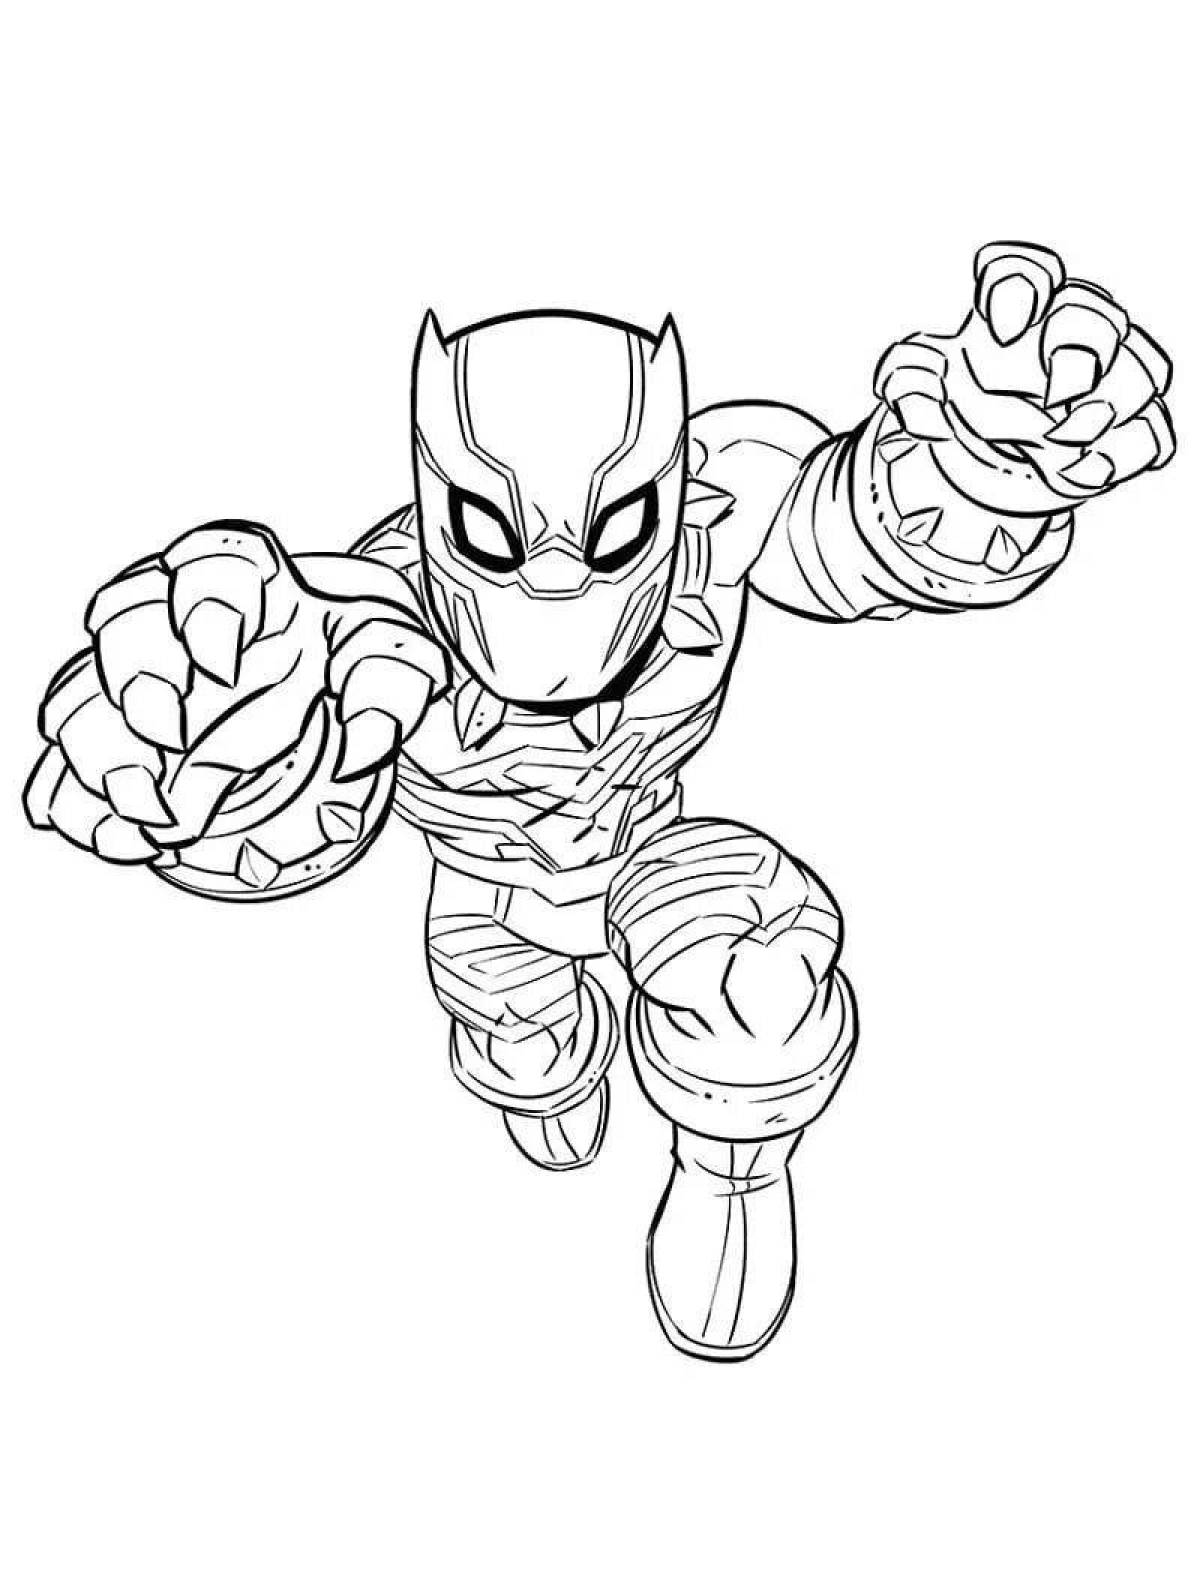 Marvel black panther coloring book